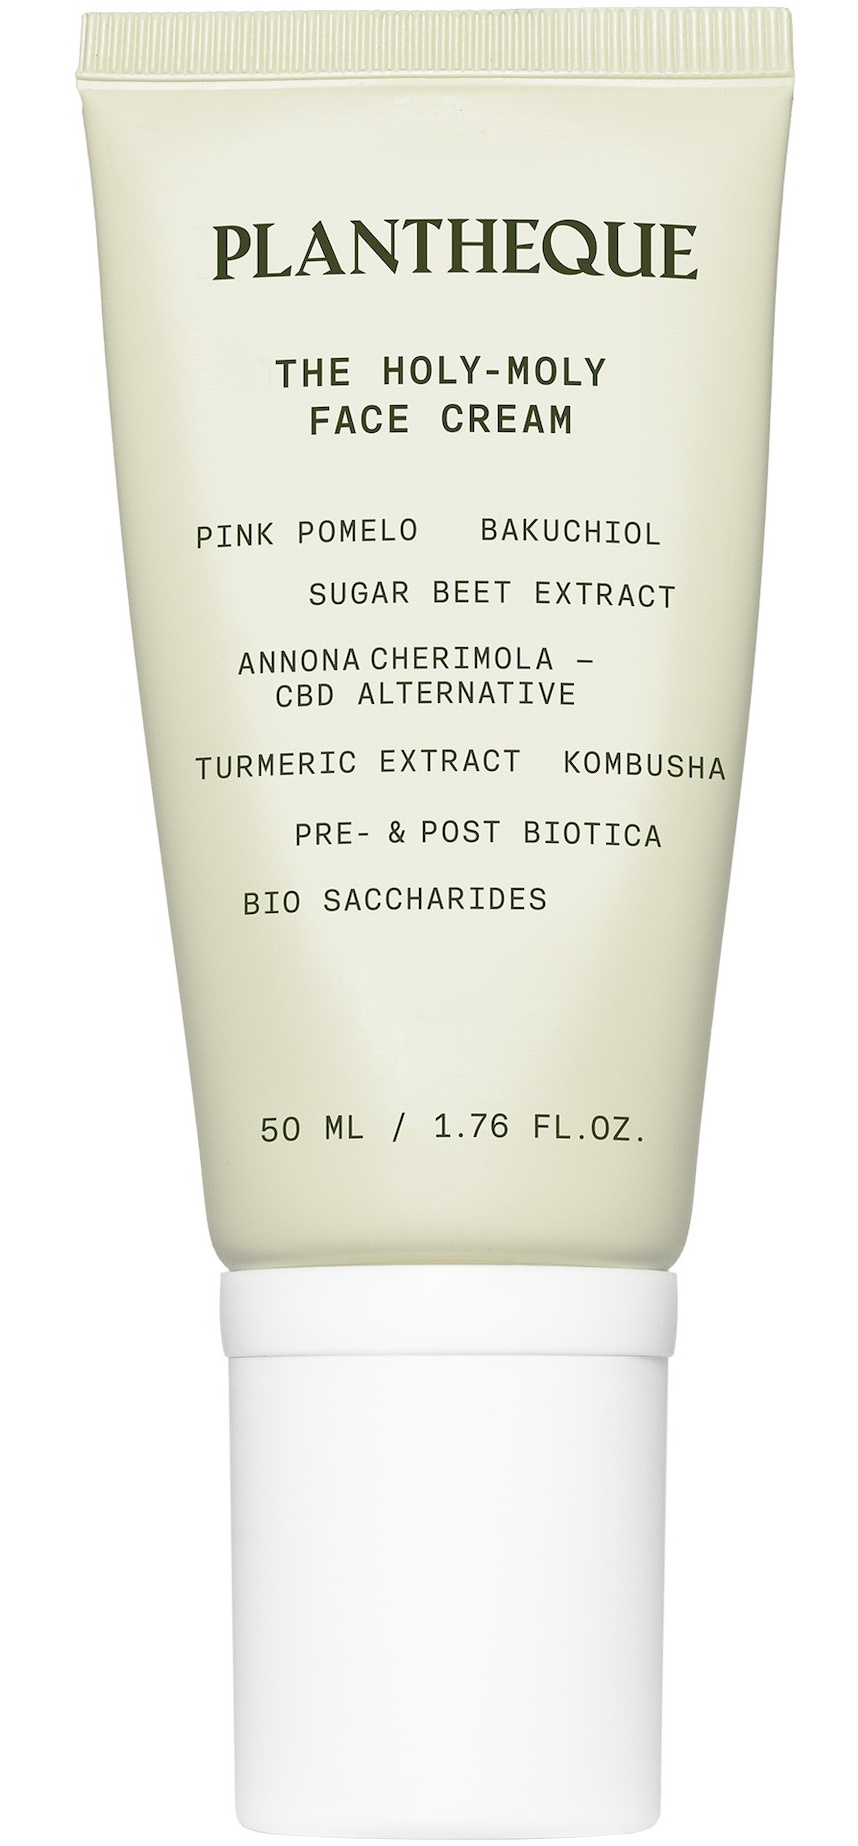 Plantheque The Holy-moly Face Cream